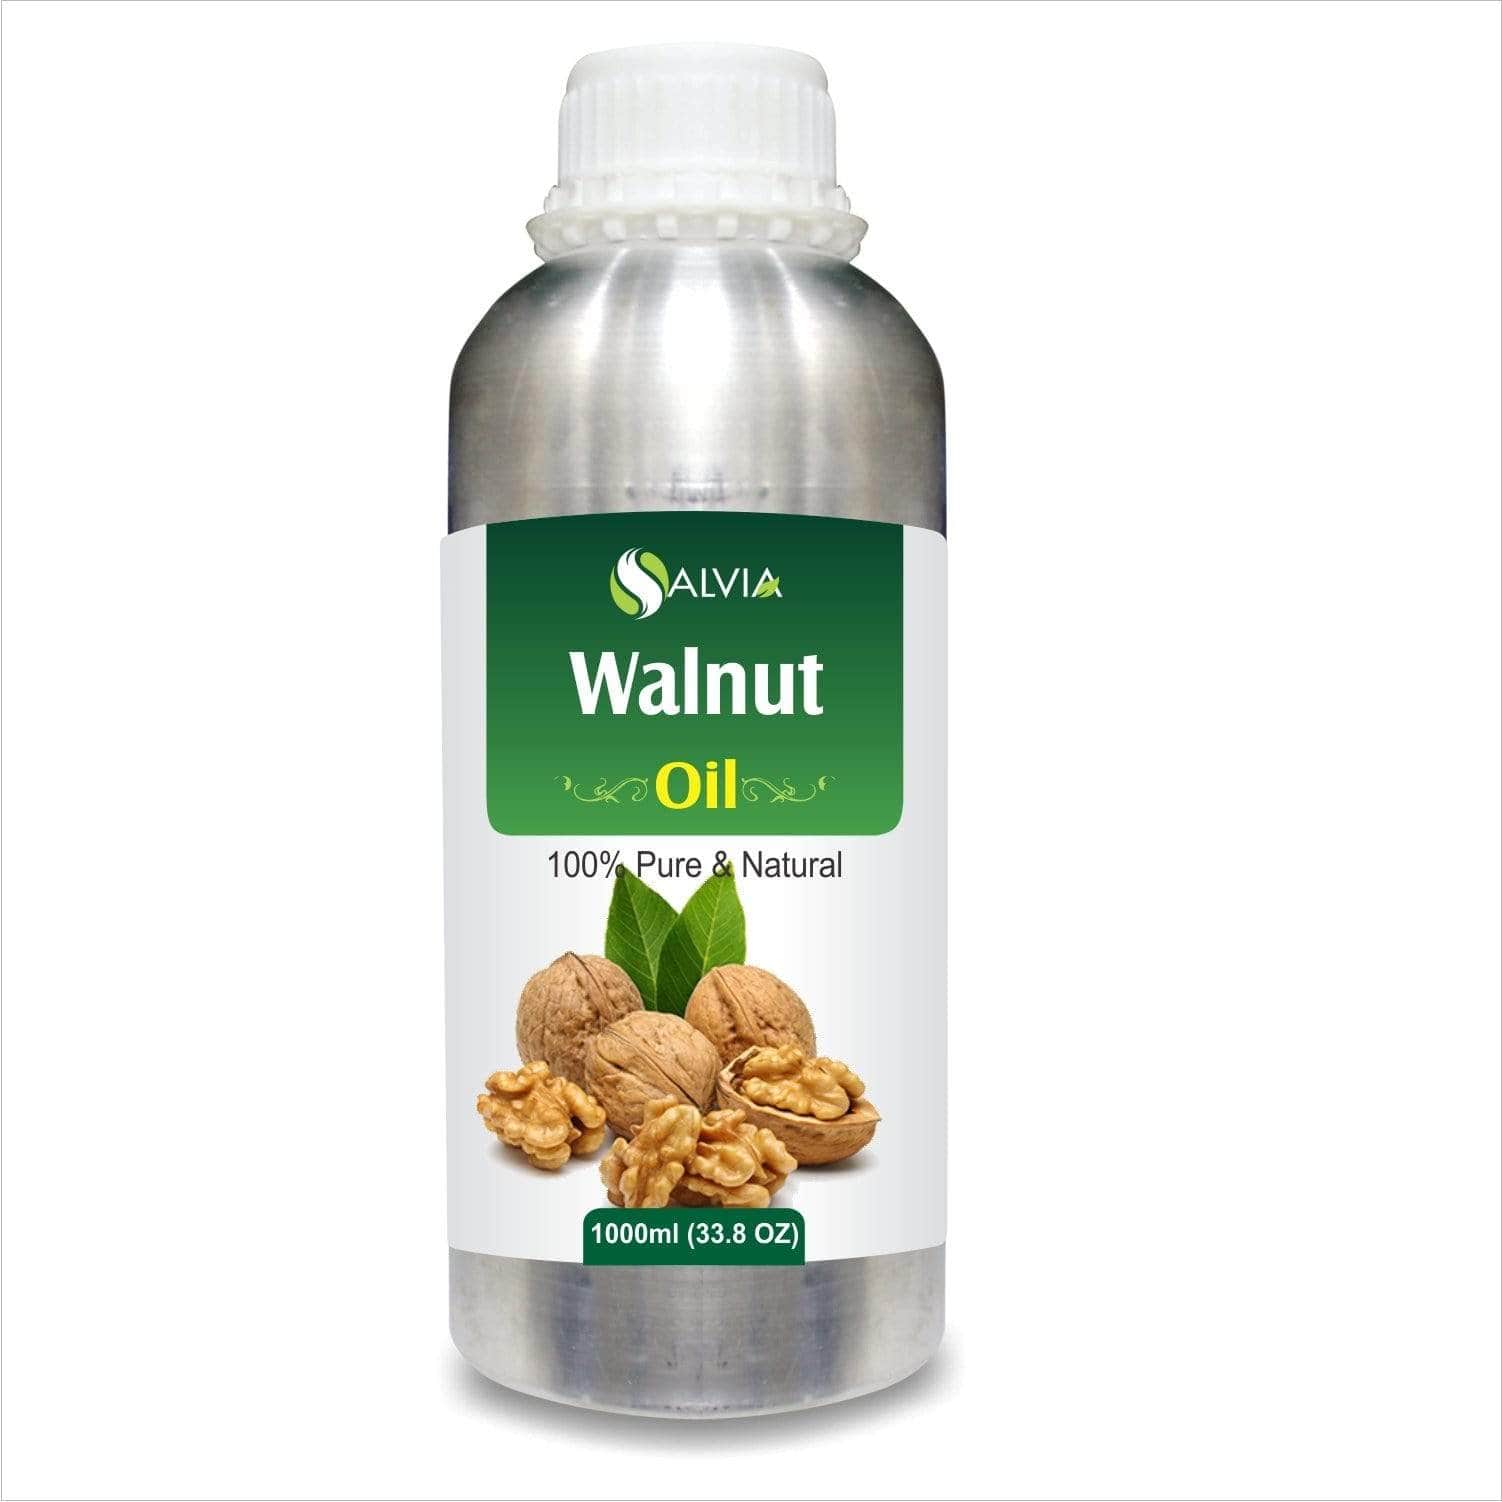 Salvia Natural Carrier Oils 1000ml Walnut Oil (Juglans-Regia) 100% Natural Pure Carrier Oil Strengthens Hair Root, Promotes hair Growth, Anti-Aging Properties, Moisturizes, Reduces Scars, Solves  Psoriasis & More